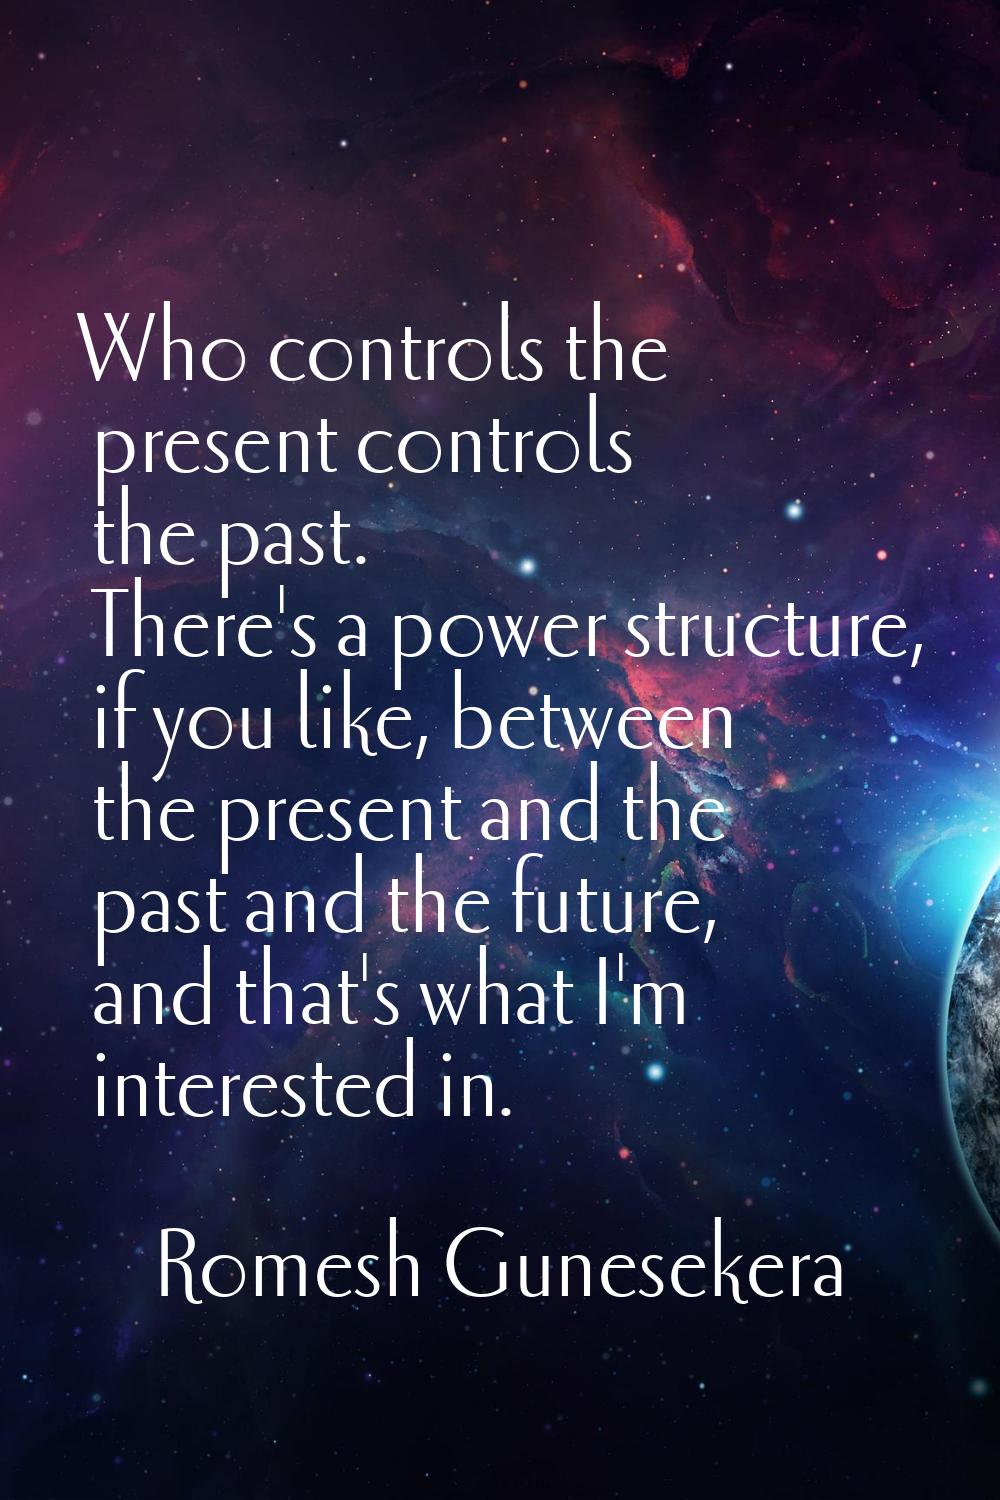 Who controls the present controls the past. There's a power structure, if you like, between the pre